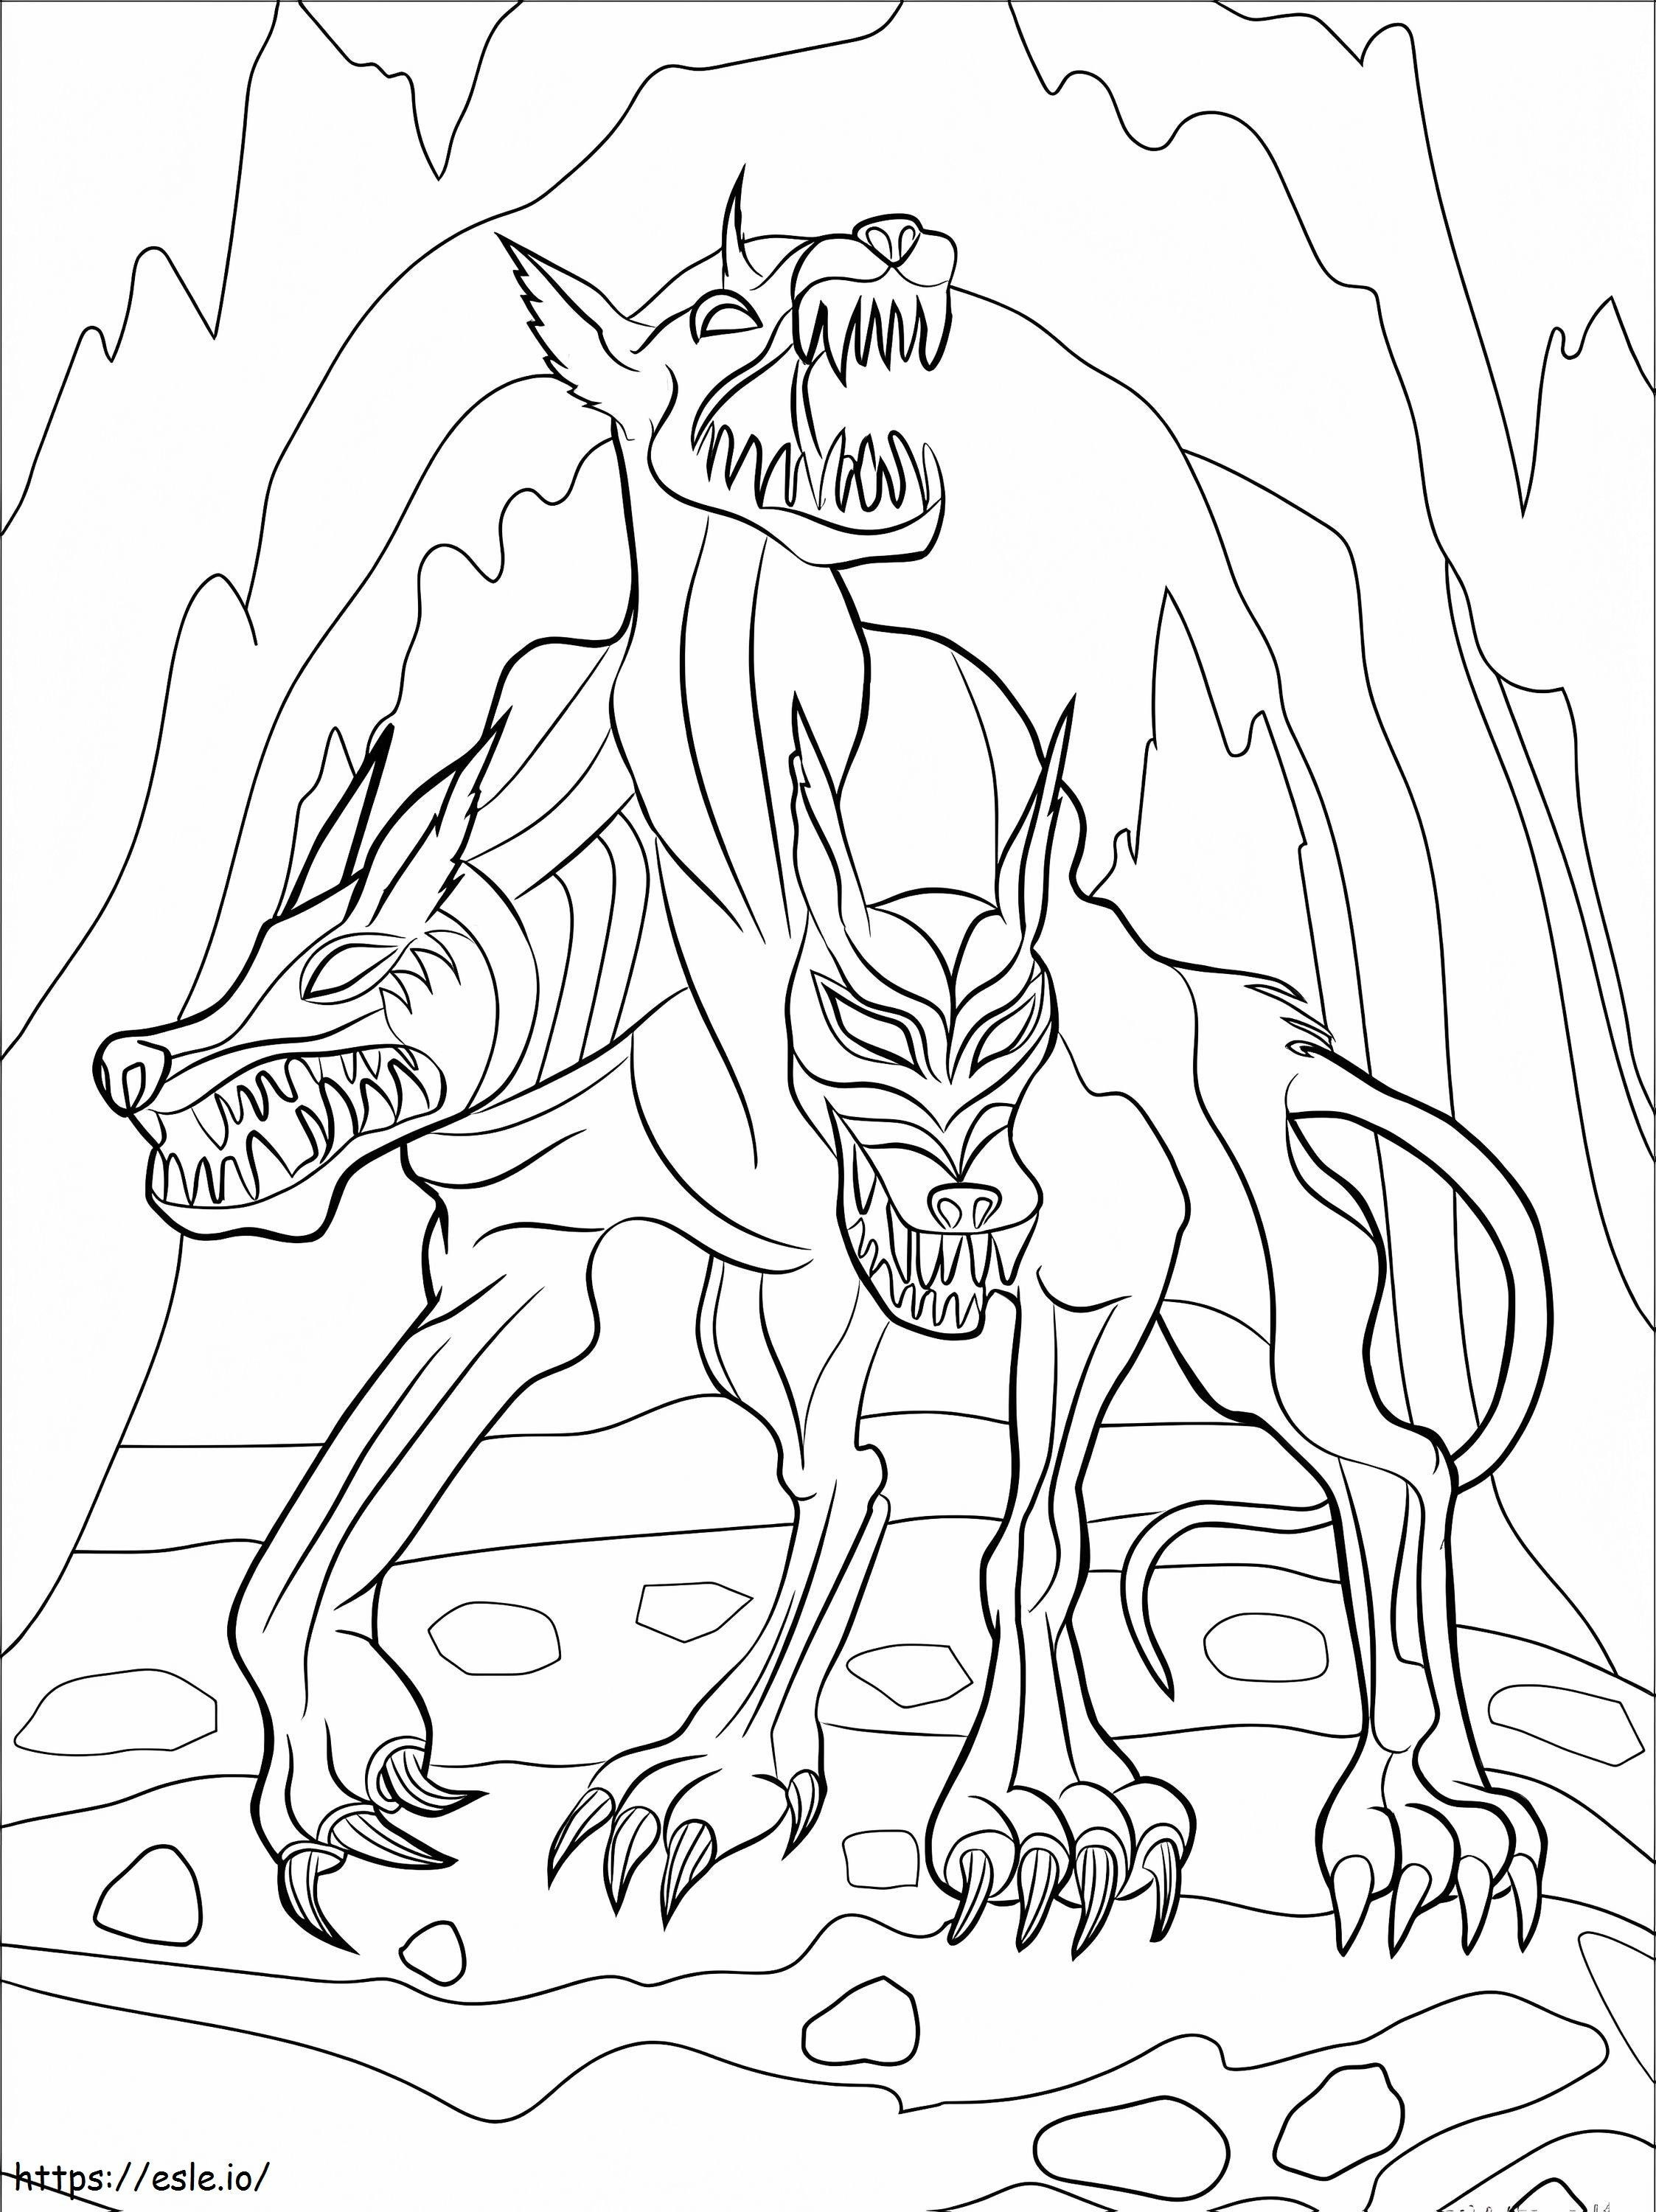 Cerberus From Hell coloring page